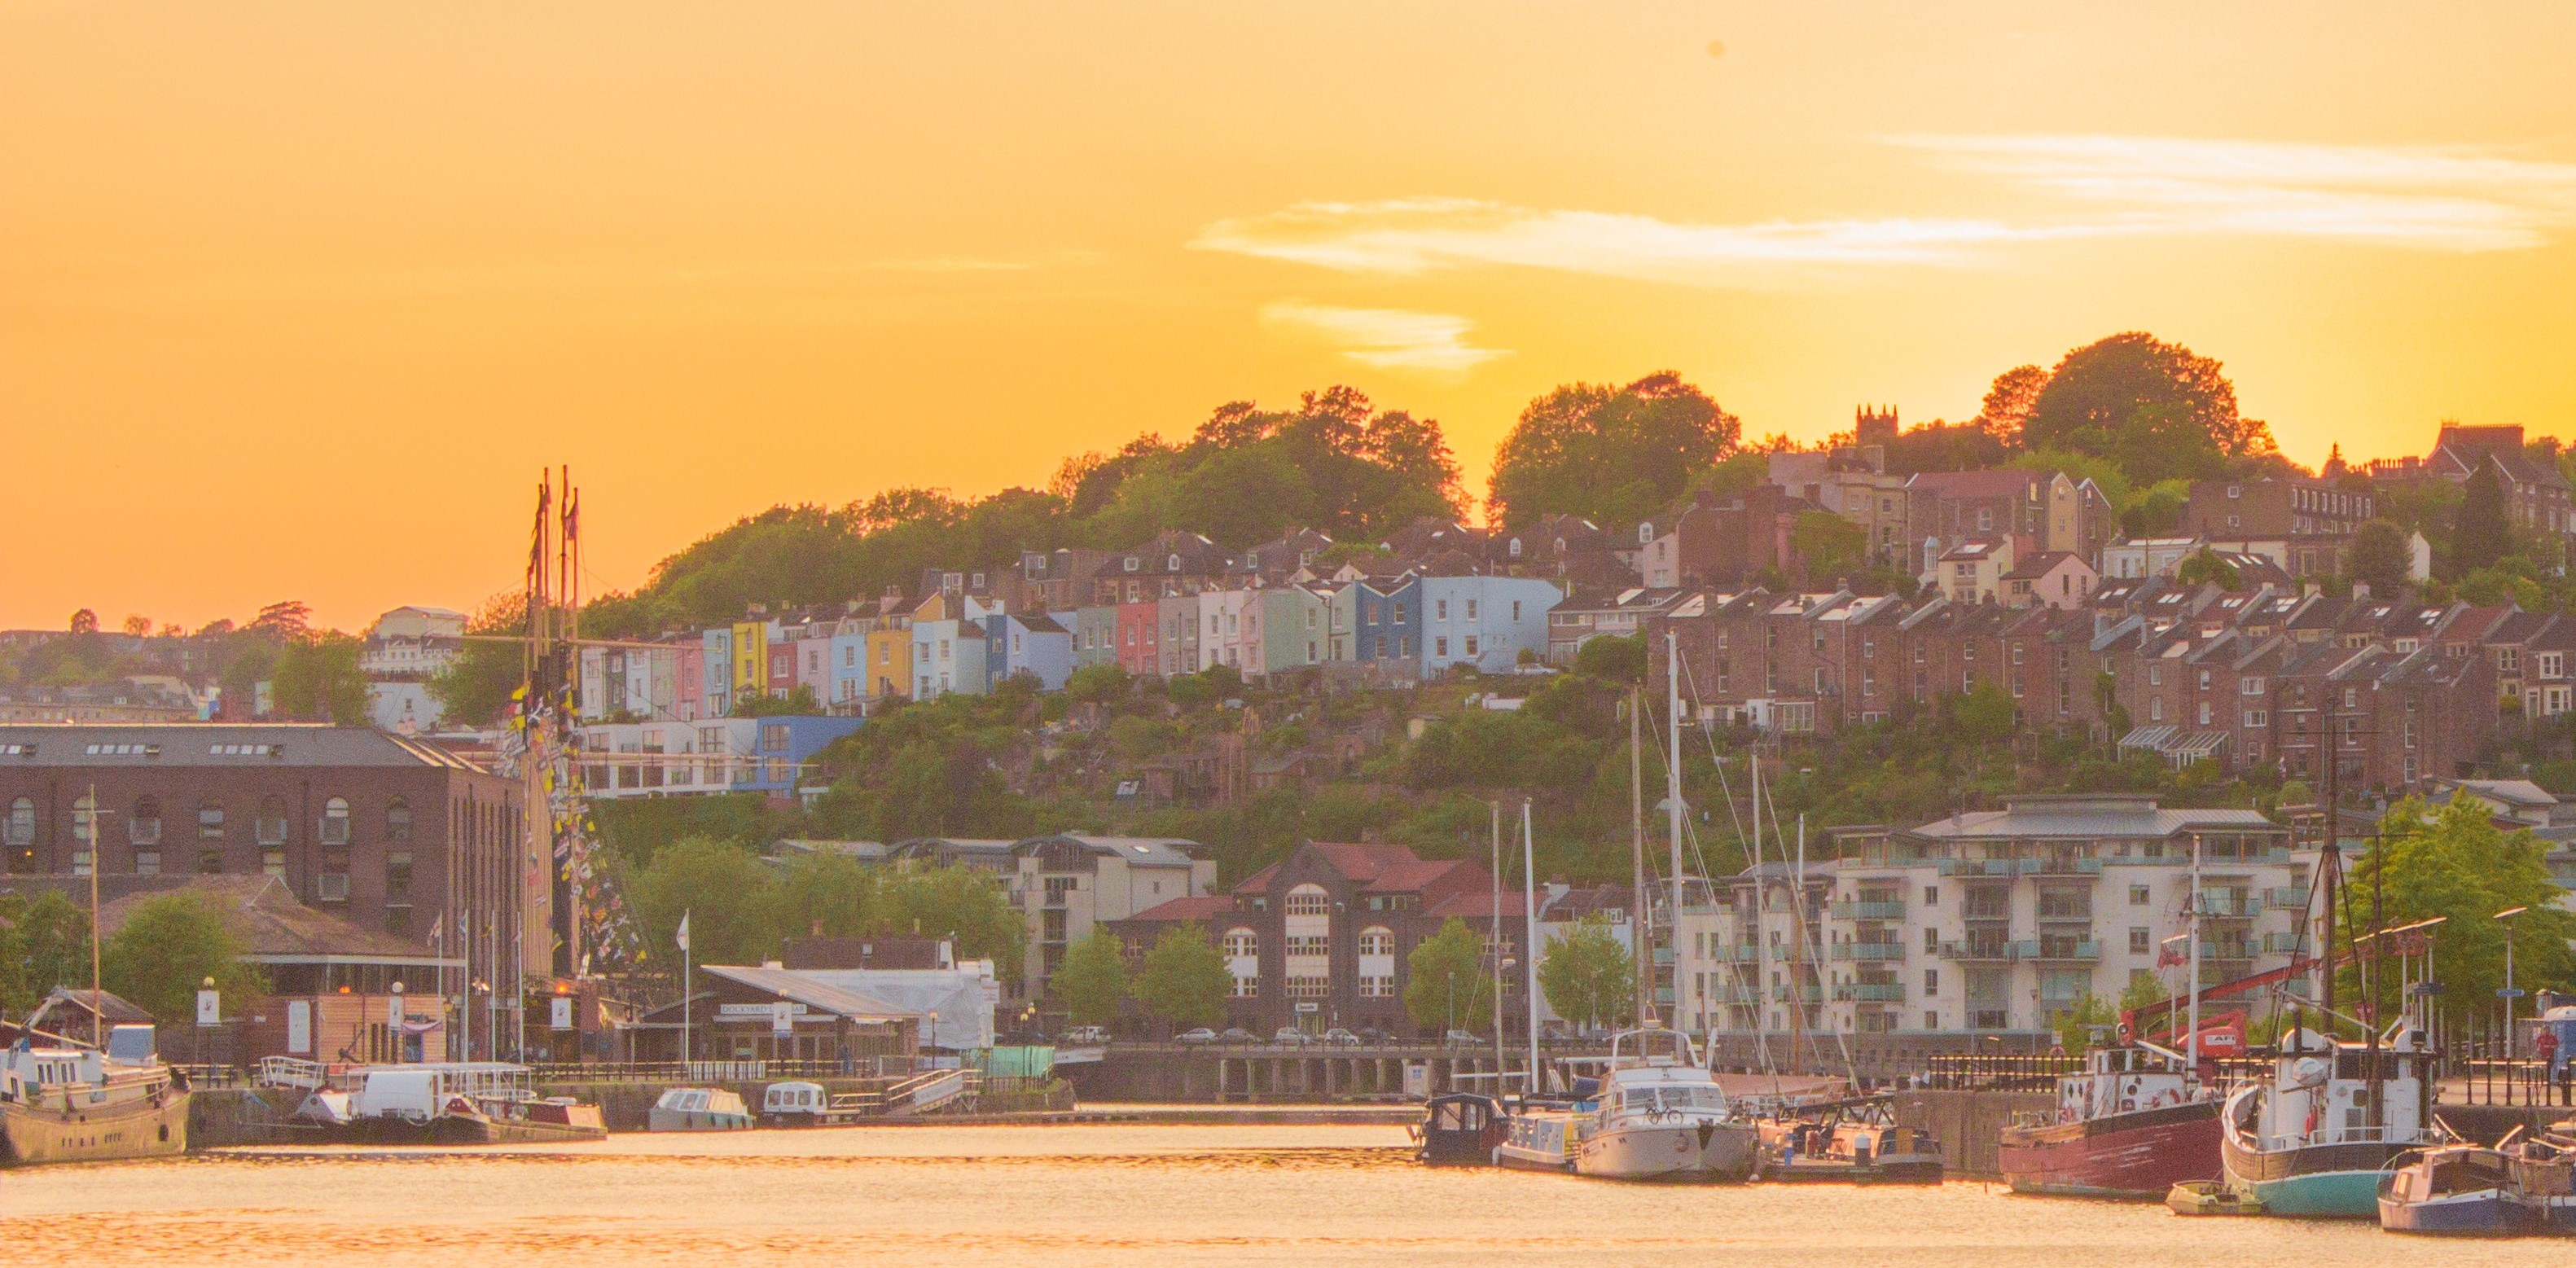 Bright sunset at Bristol harbourside reflects on water, a backdrop to boats and colourful houses